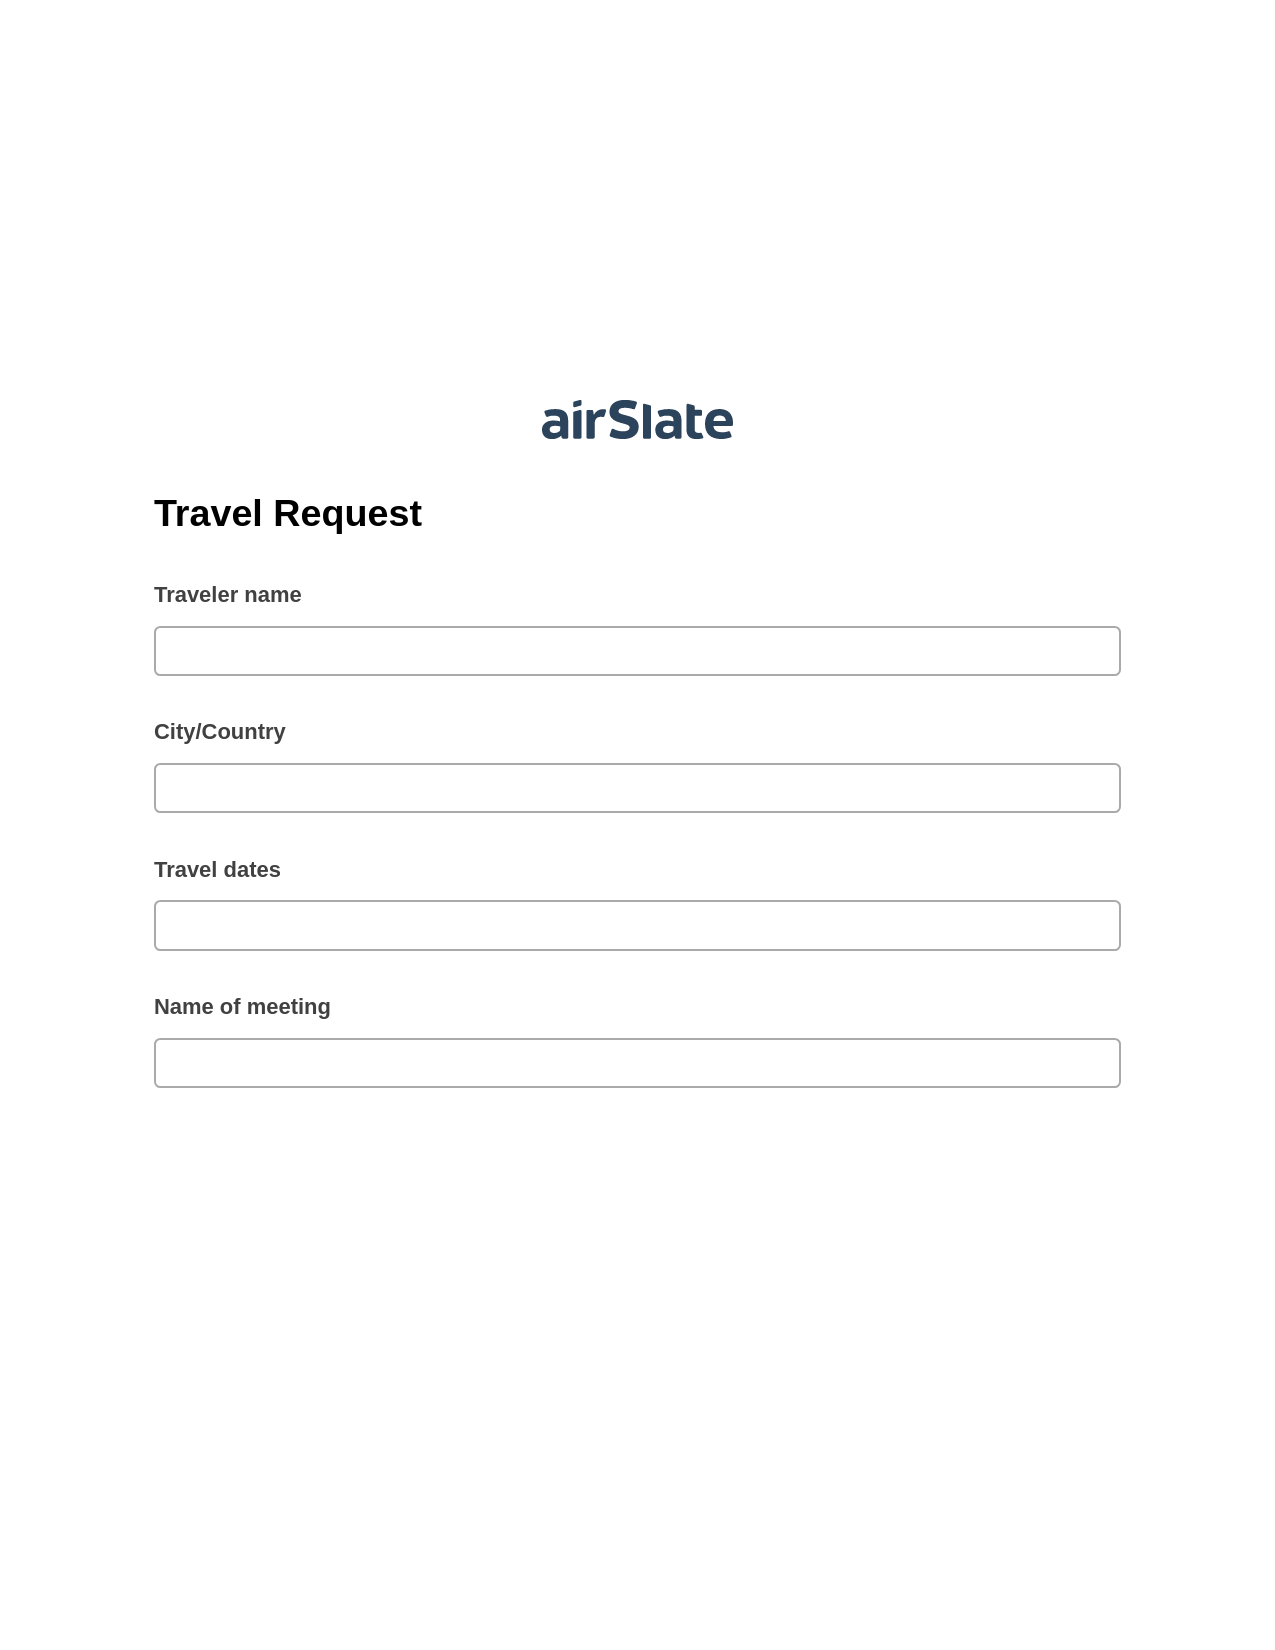 Travel Request Pre-fill from Salesforce Record Bot, Create slate addon, Dropbox Bot